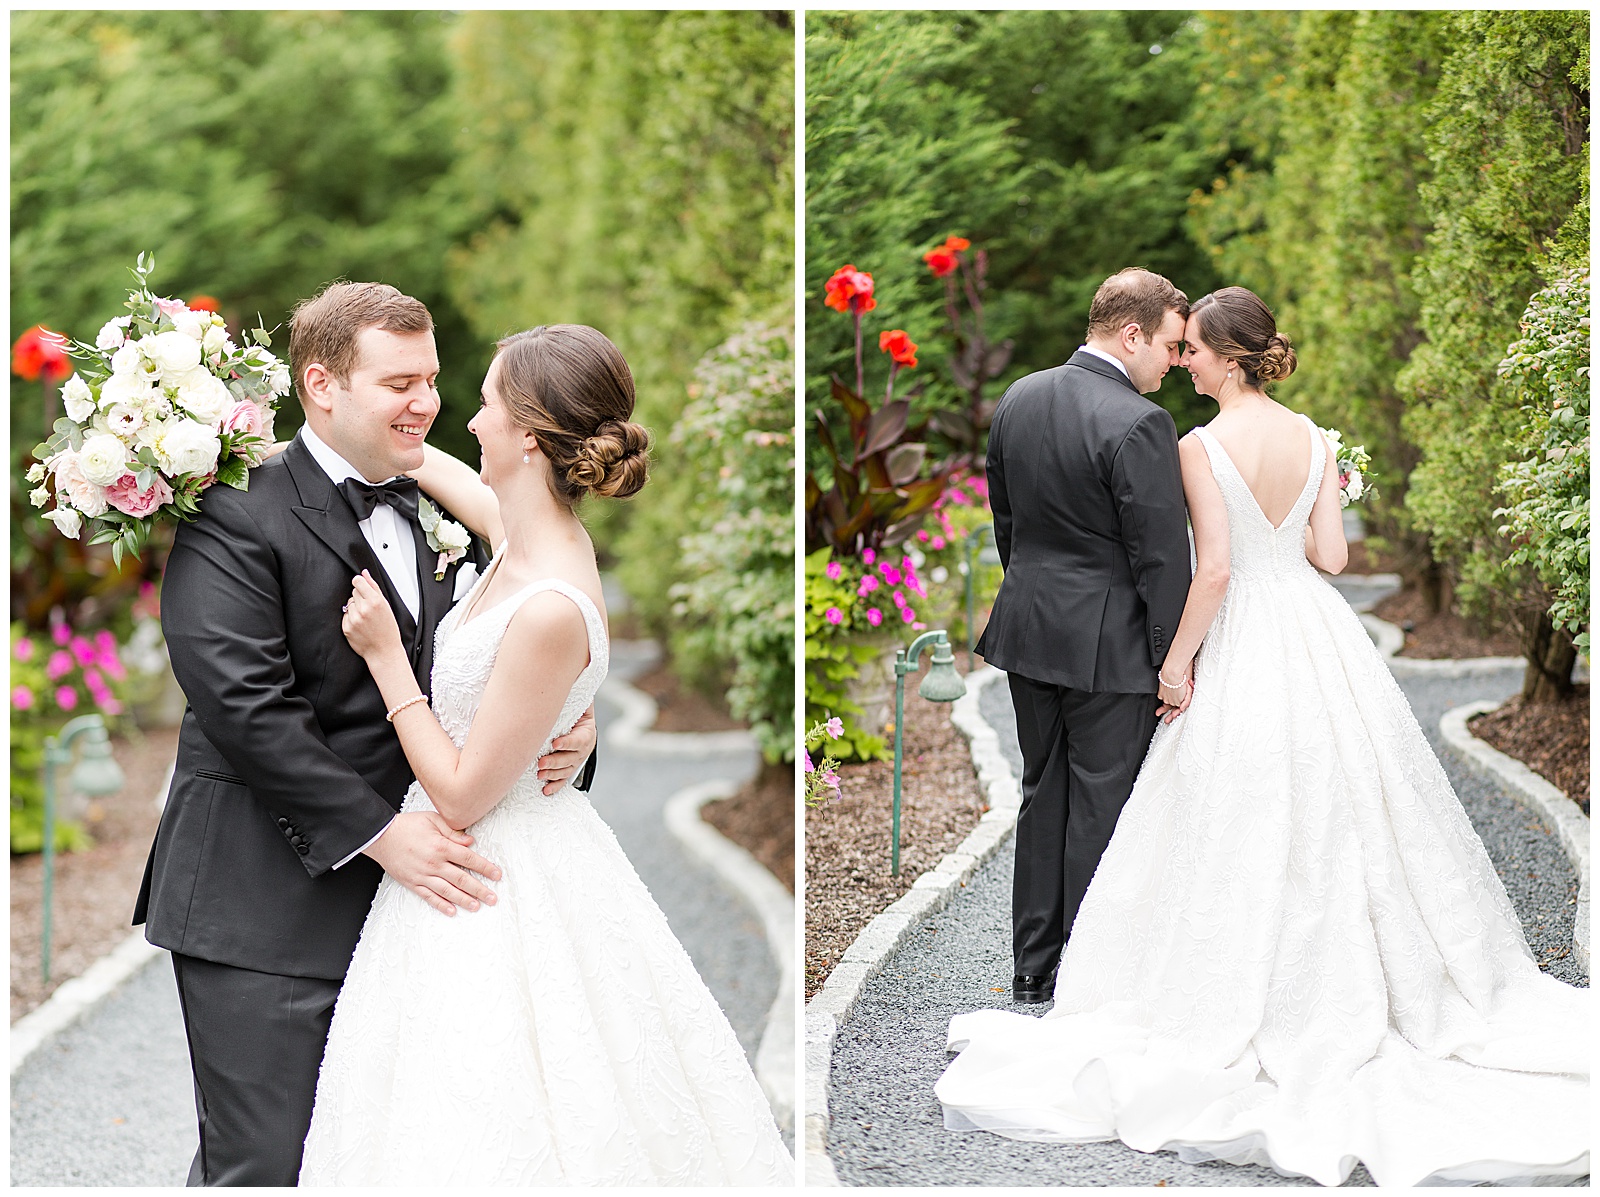 First look images at the Chanler gardens